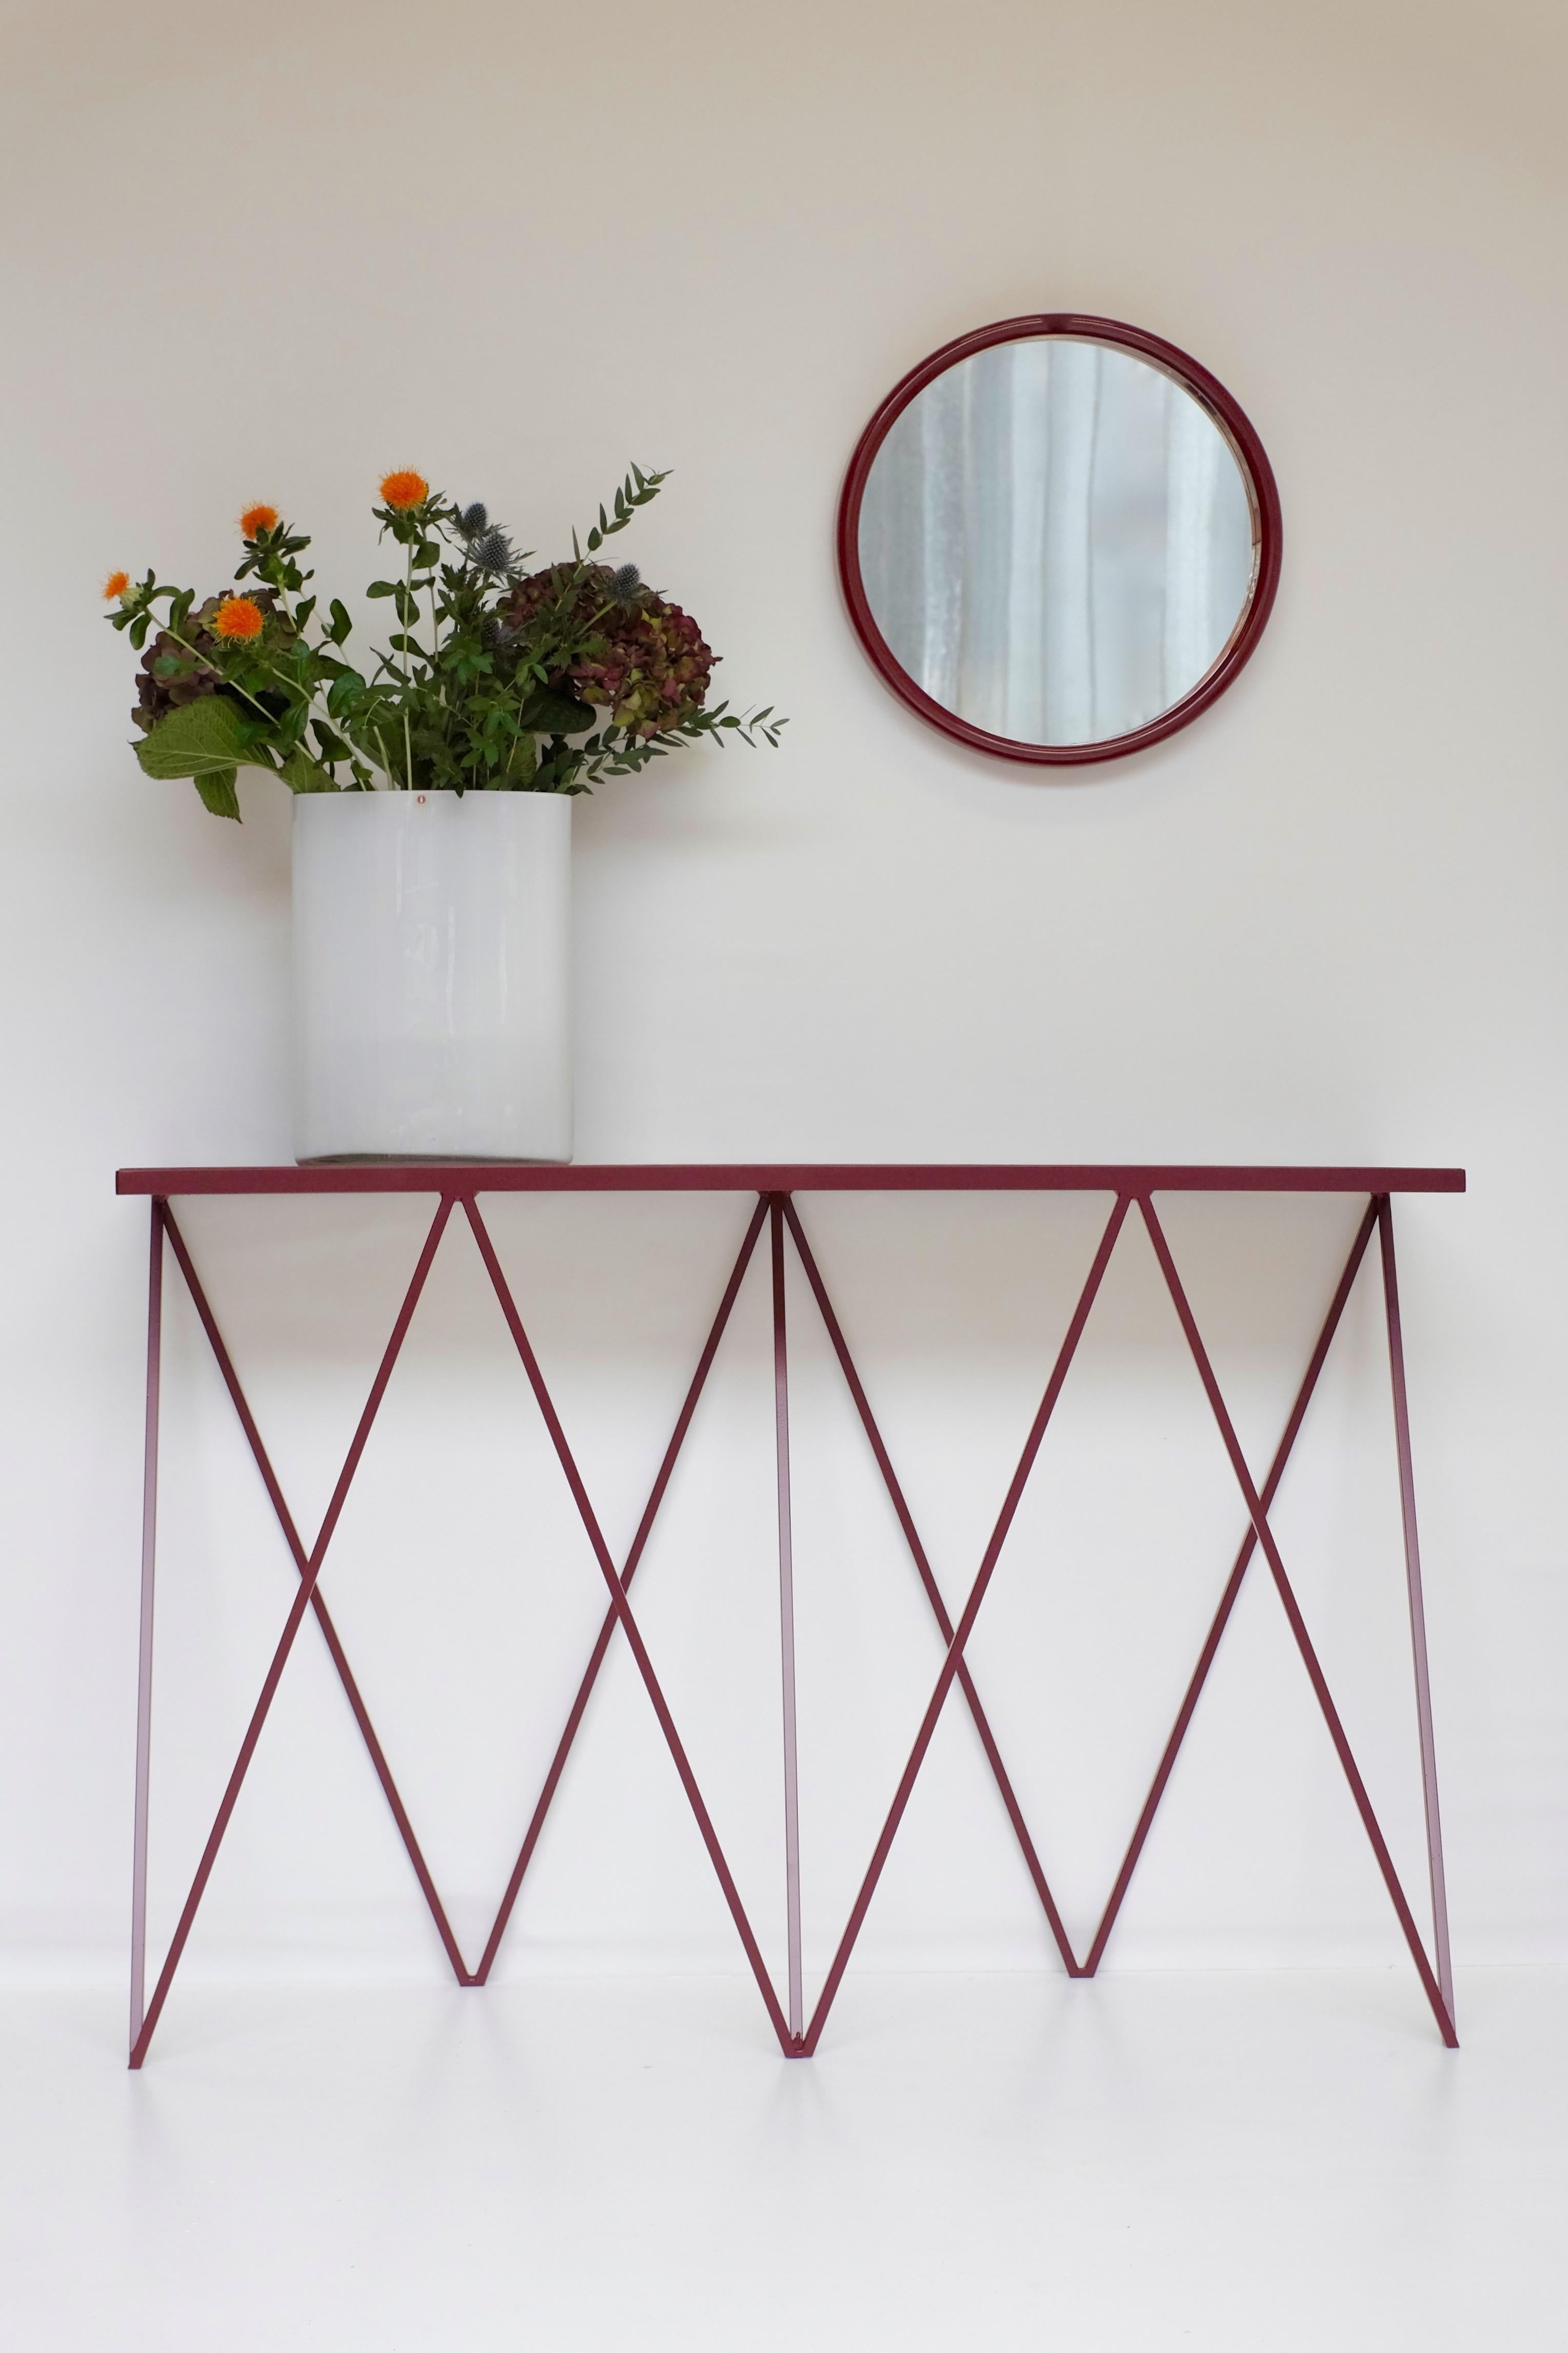 The Giraffe console table is a modern statement piece. The powder-coated steel console table looks stunning is the hallway with a bunch of flowers or as a lamp table in any room. The beauty of the Giraffe console table is that it works both against